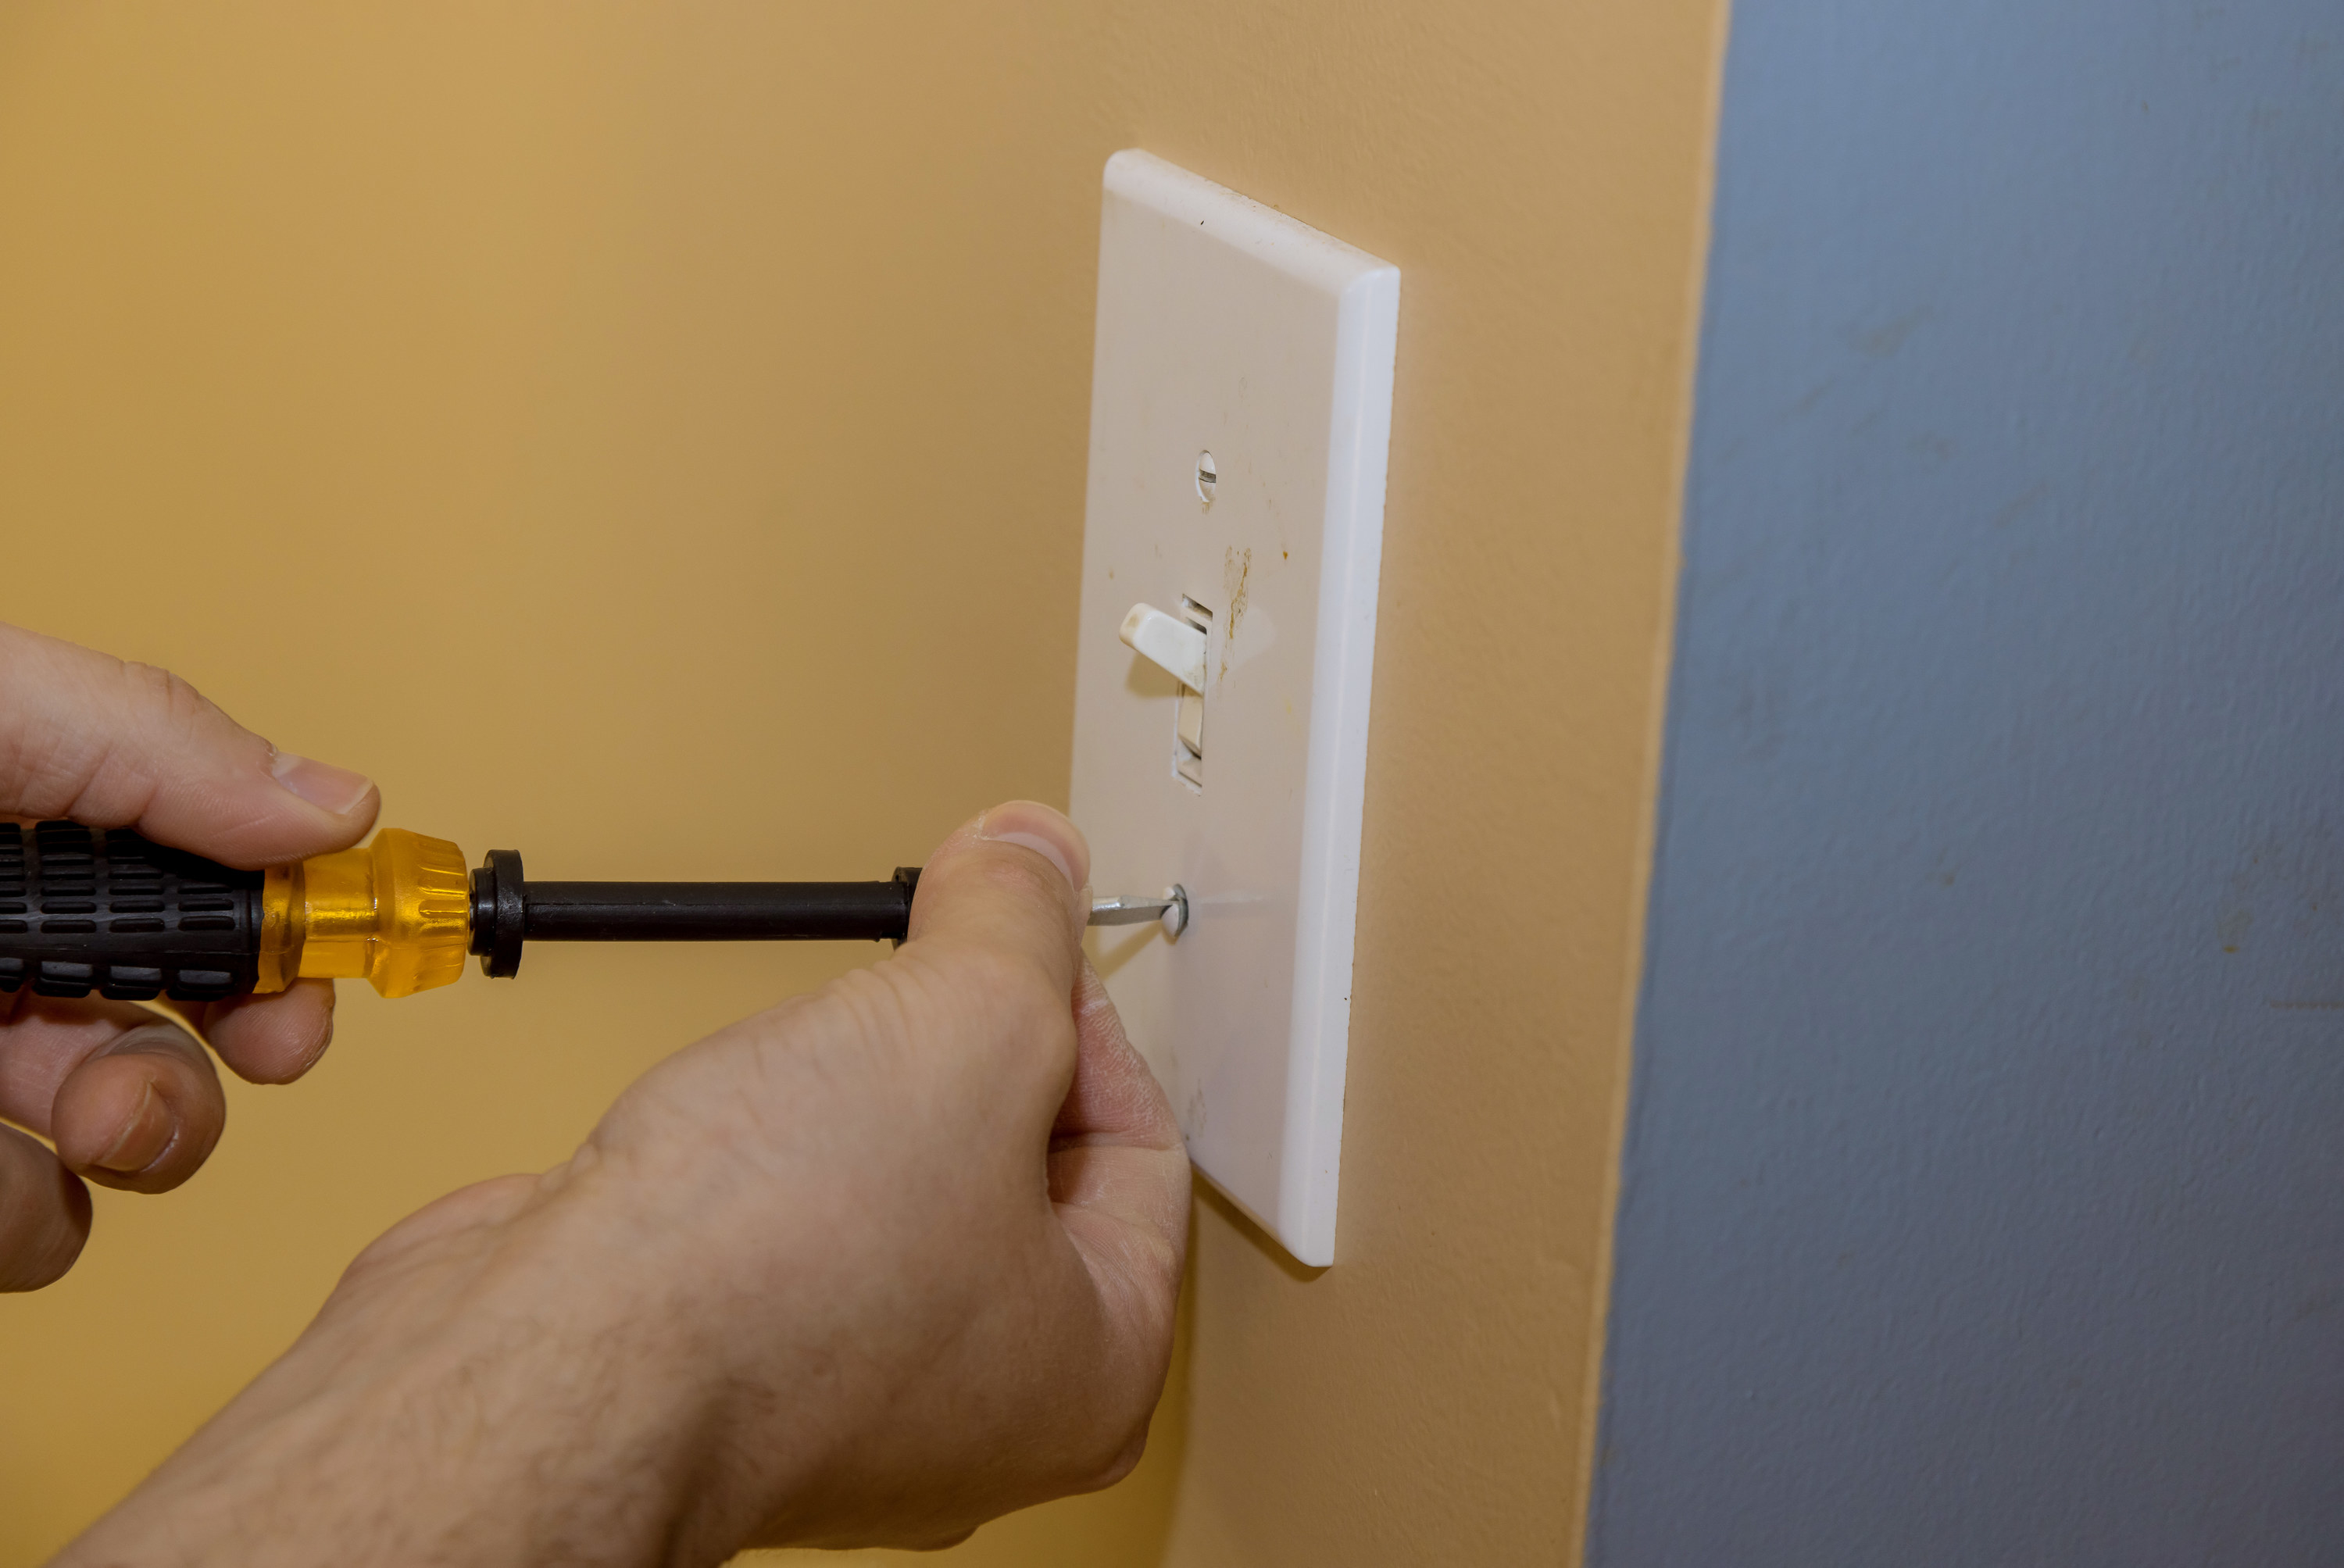 installing a new light switch cover on the wall